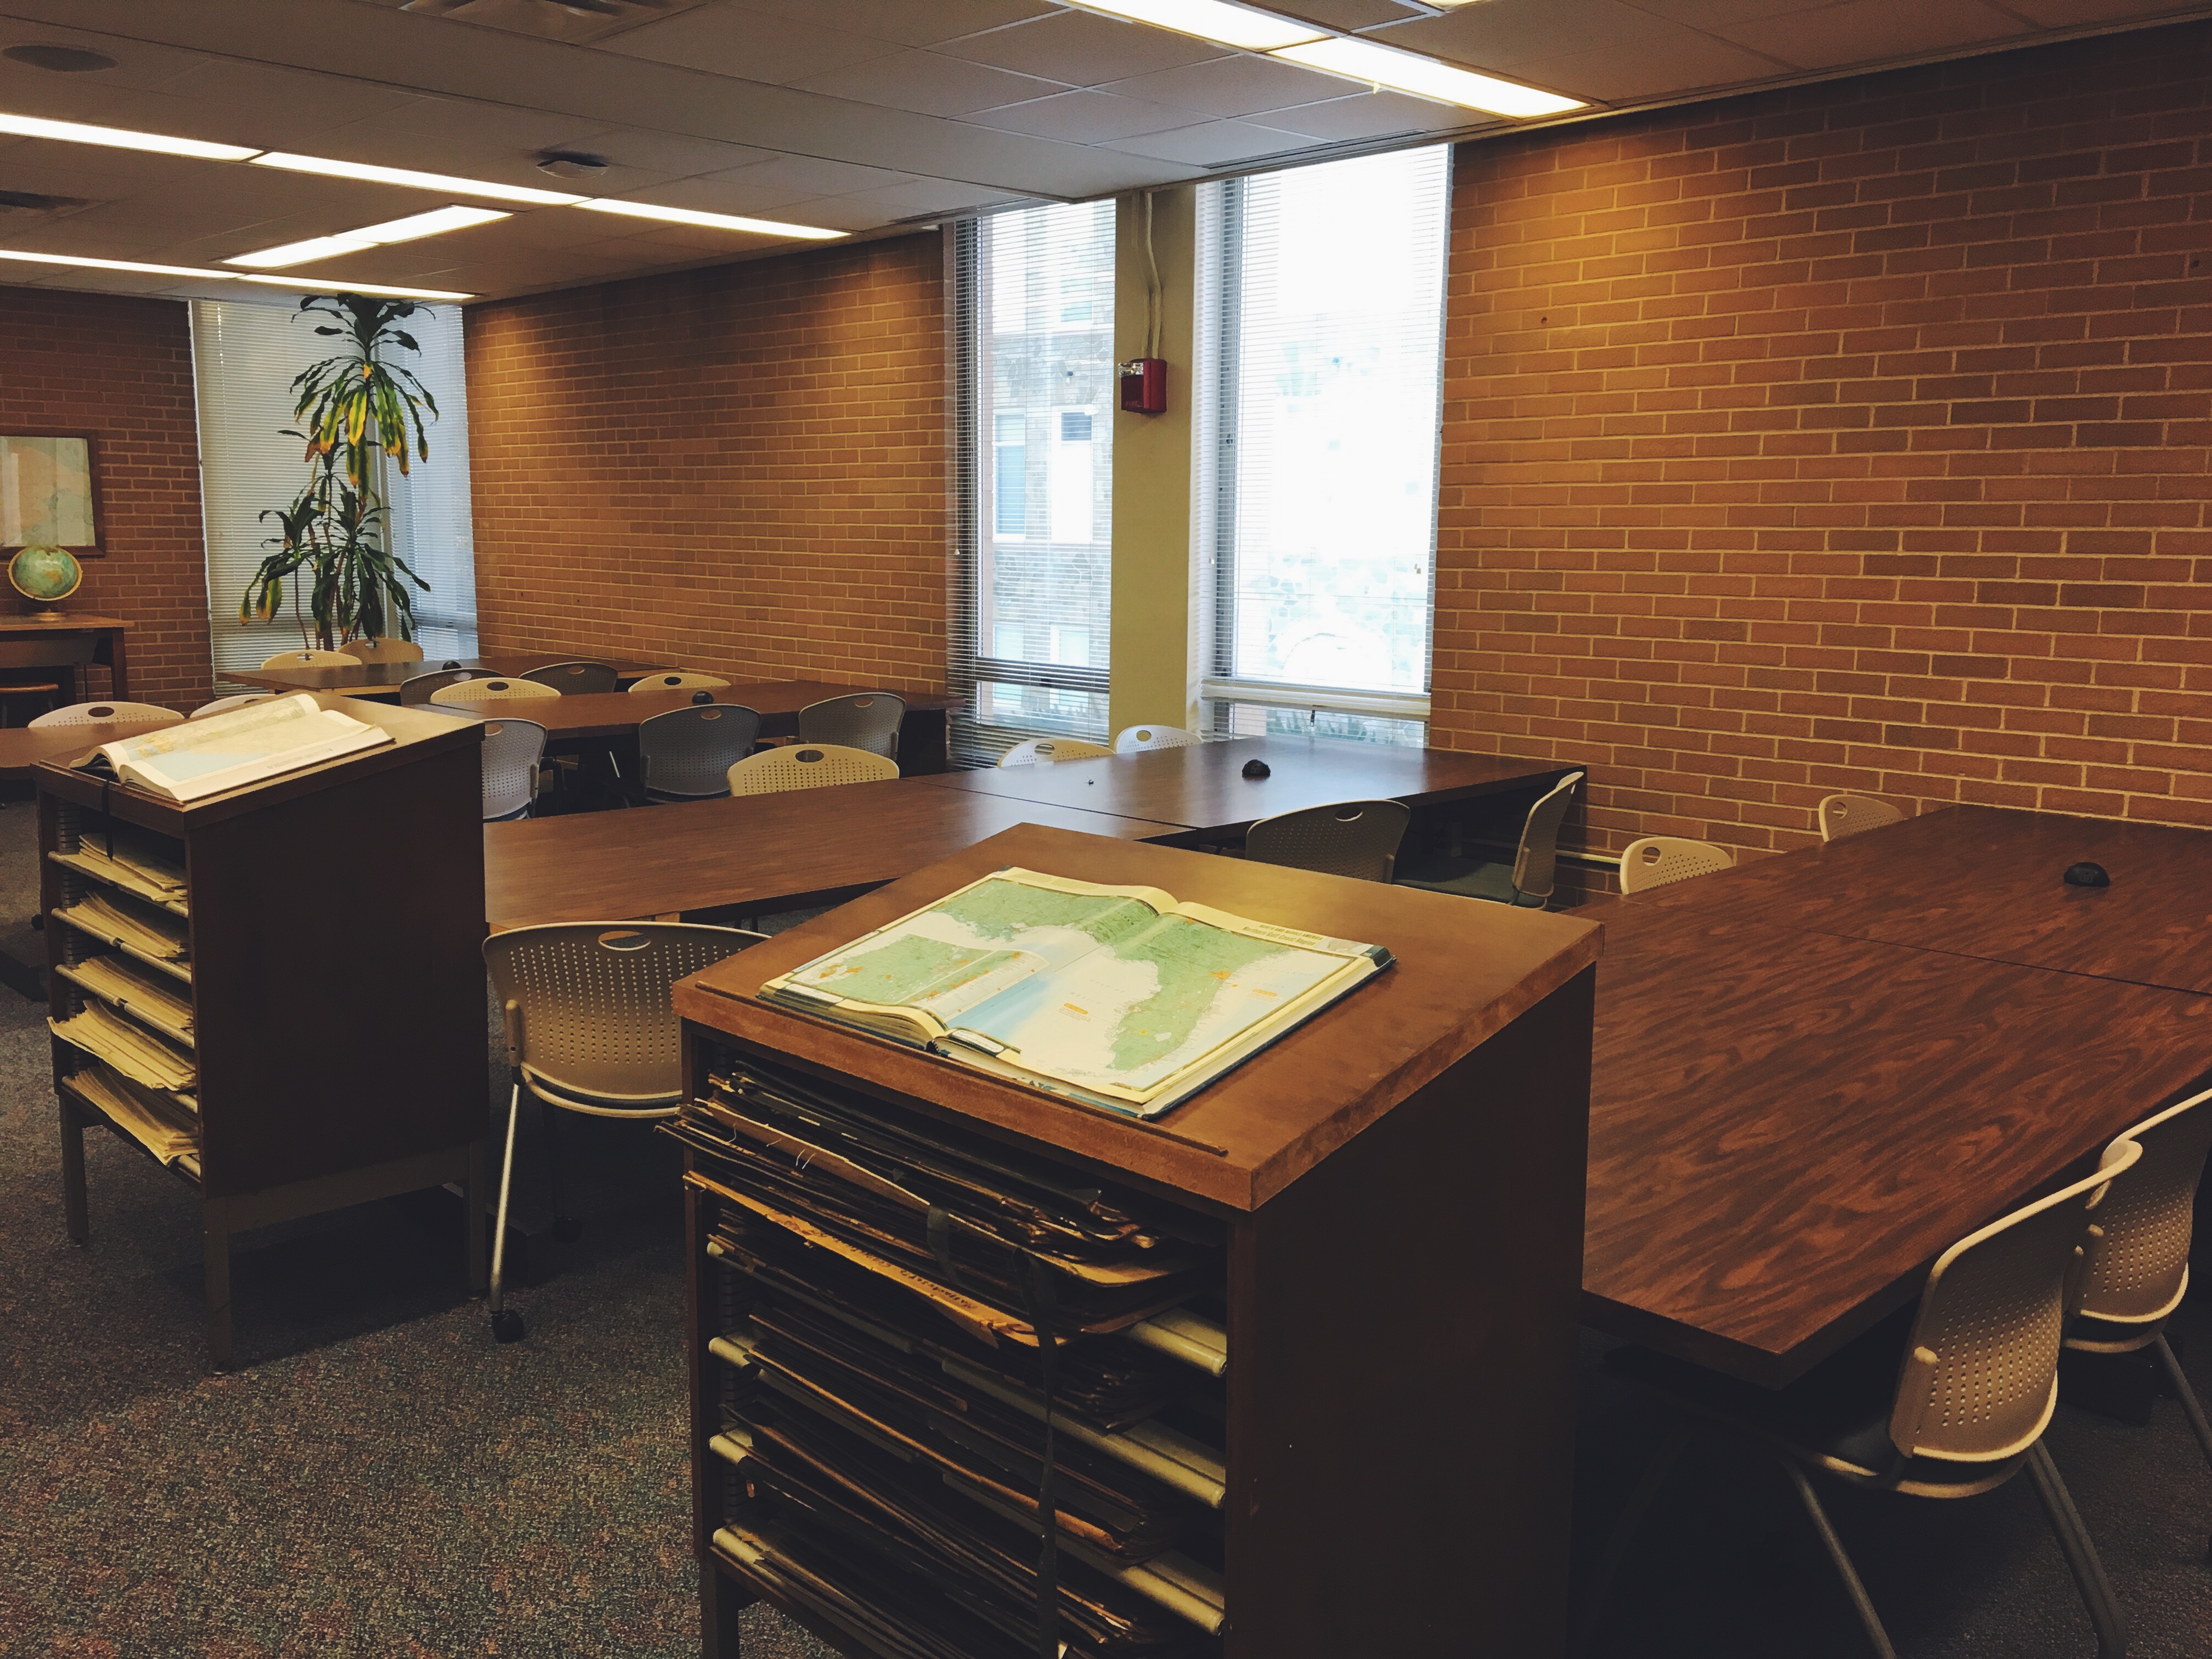 West Chester study spots: the Maps room located on the second floor of Francis Harvey Green Library